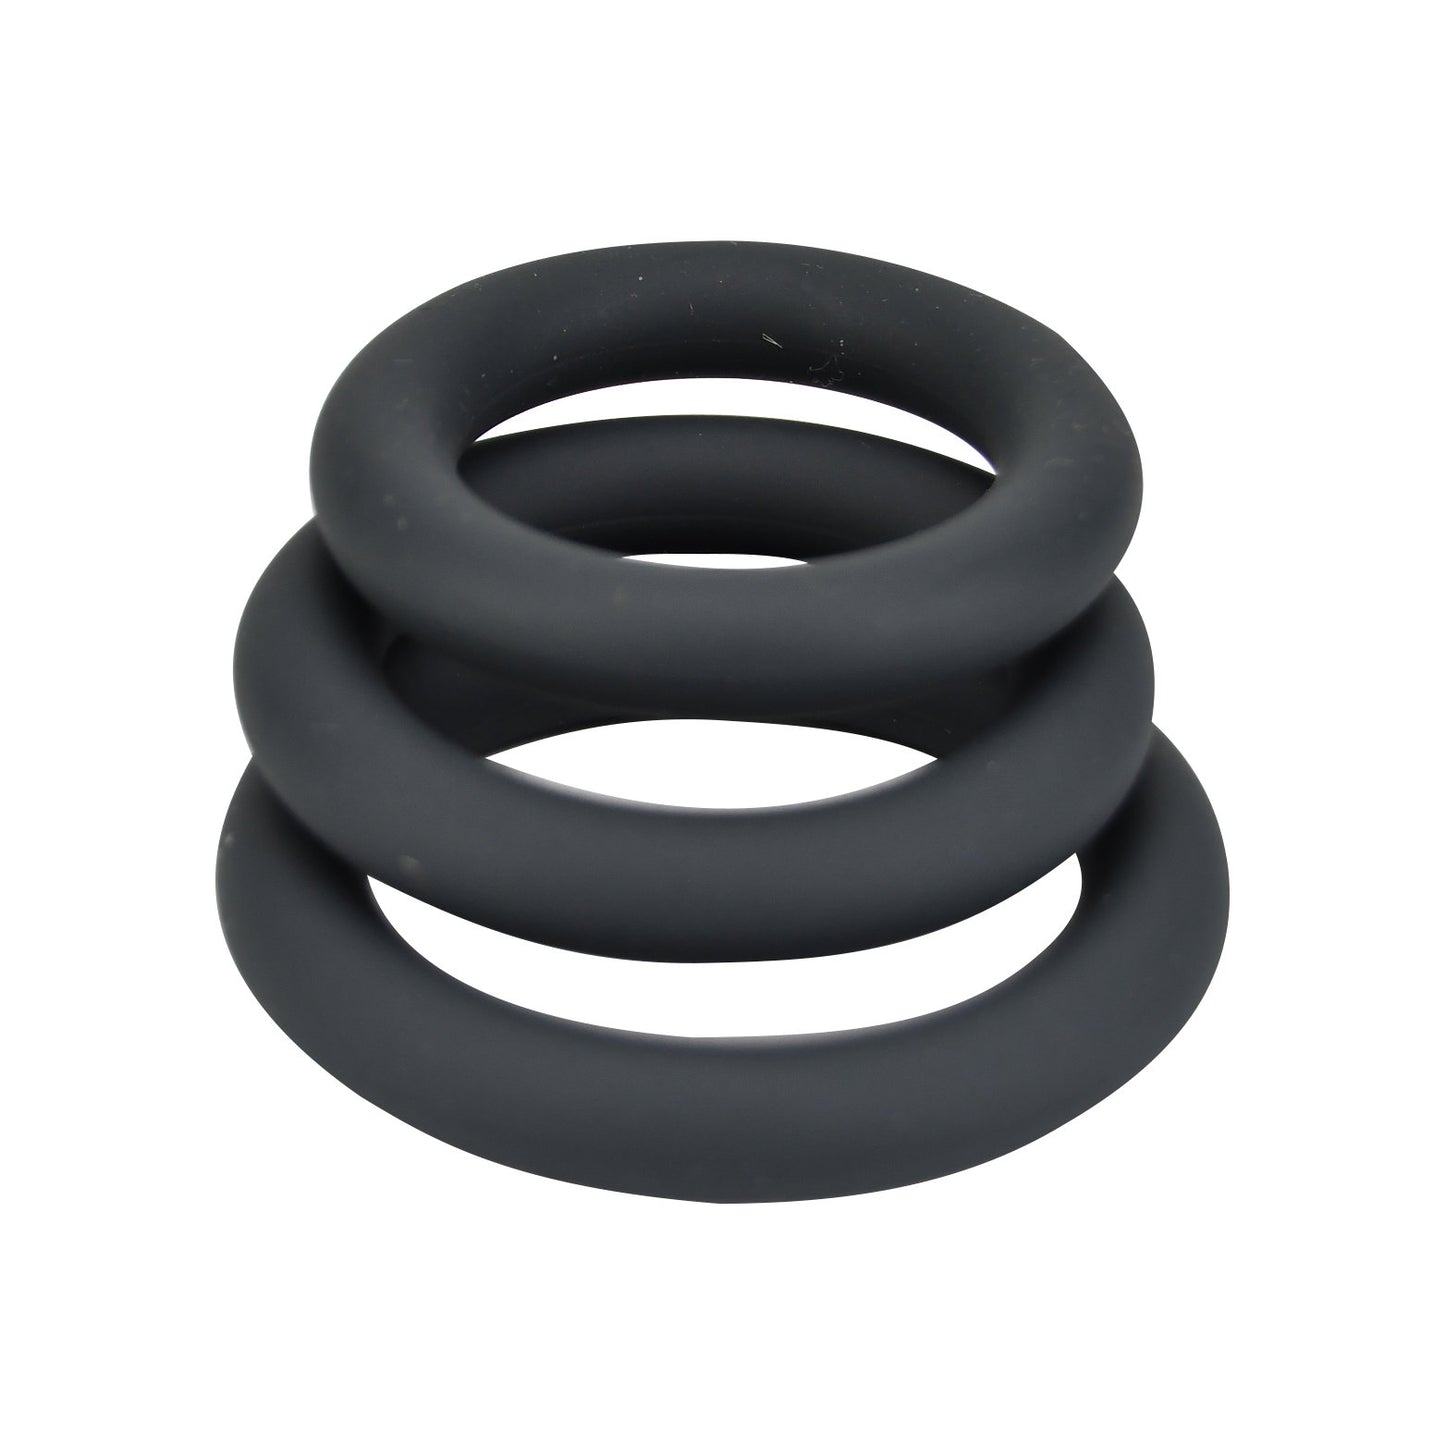 Silicone Extra Thick Cockring 3-Pack Black - N11708